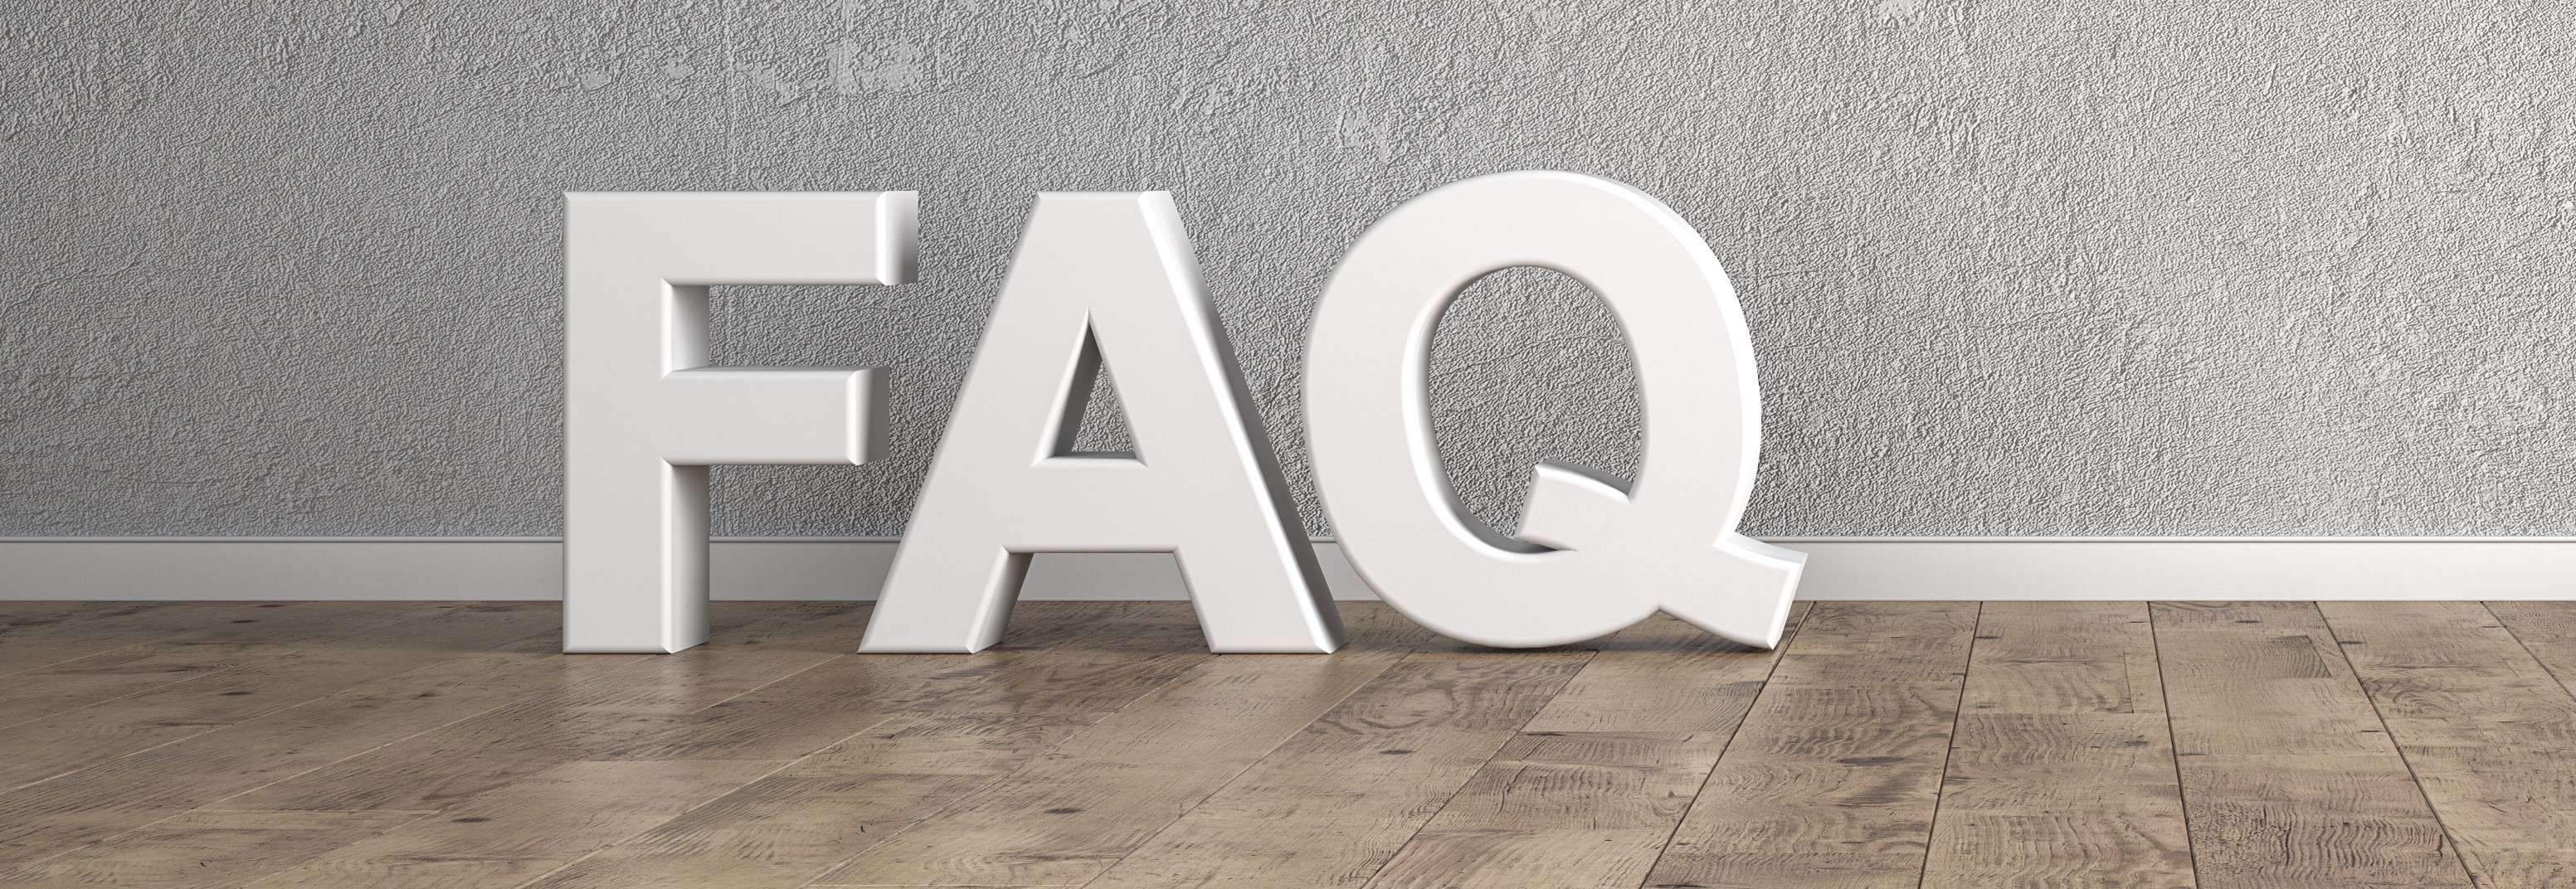 Finger Pointing at FAQ Search Text